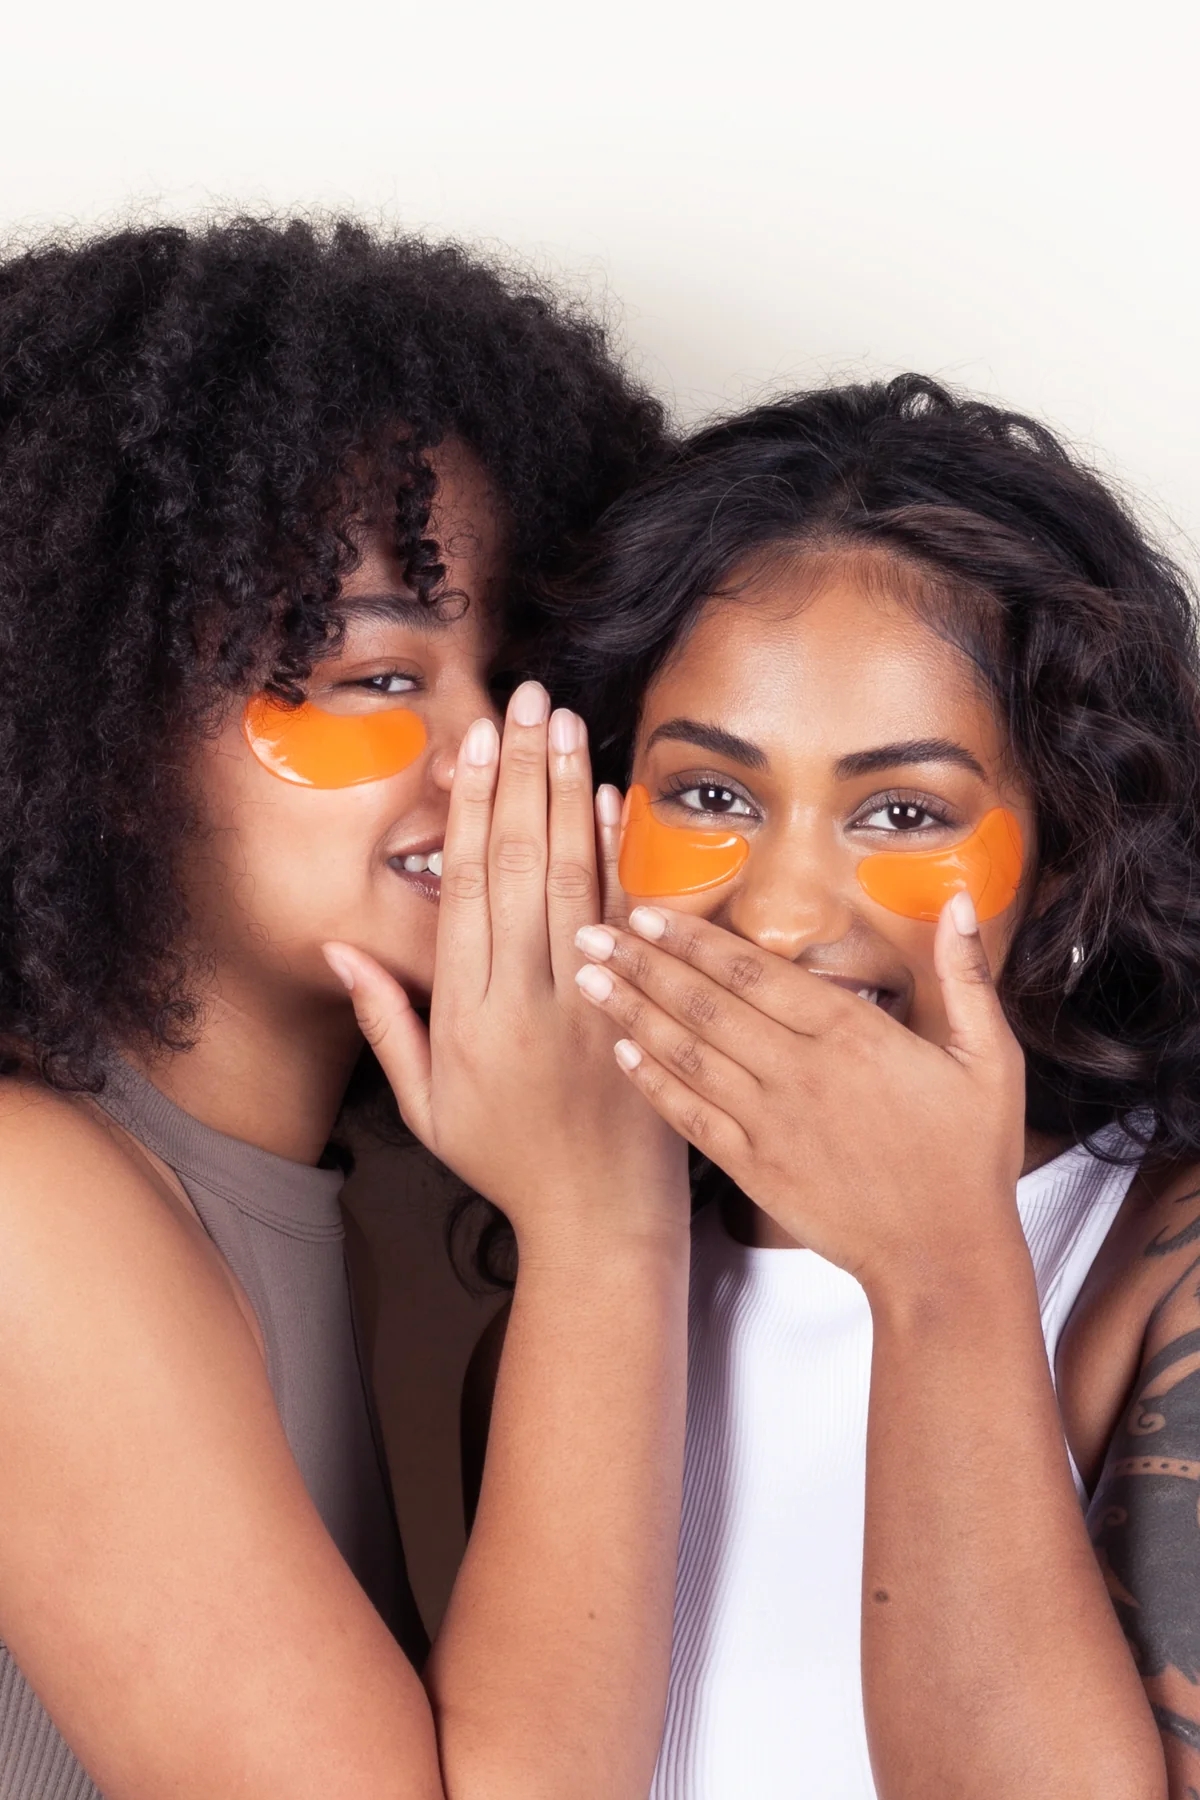 6 Amazing Benefits of Pumpkins for Beauty (Skin & Hair)